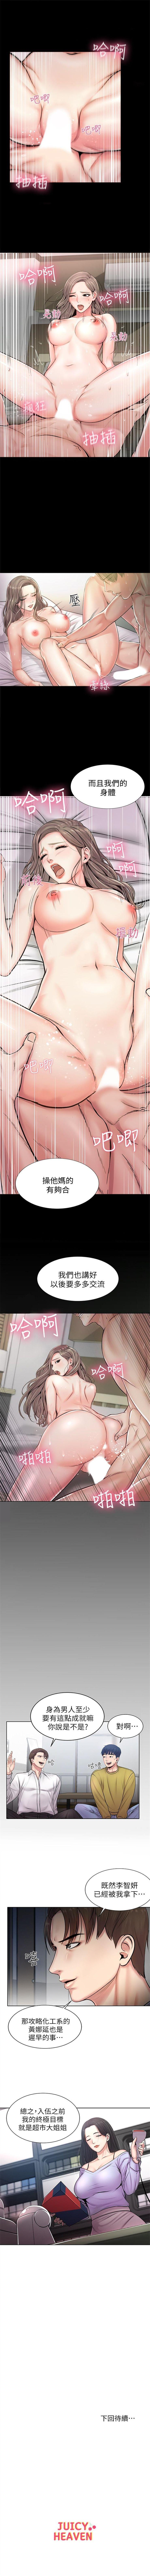 Foreplay 超市的漂亮姐姐 1-32 官方中文（連載中） Russia - Page 9